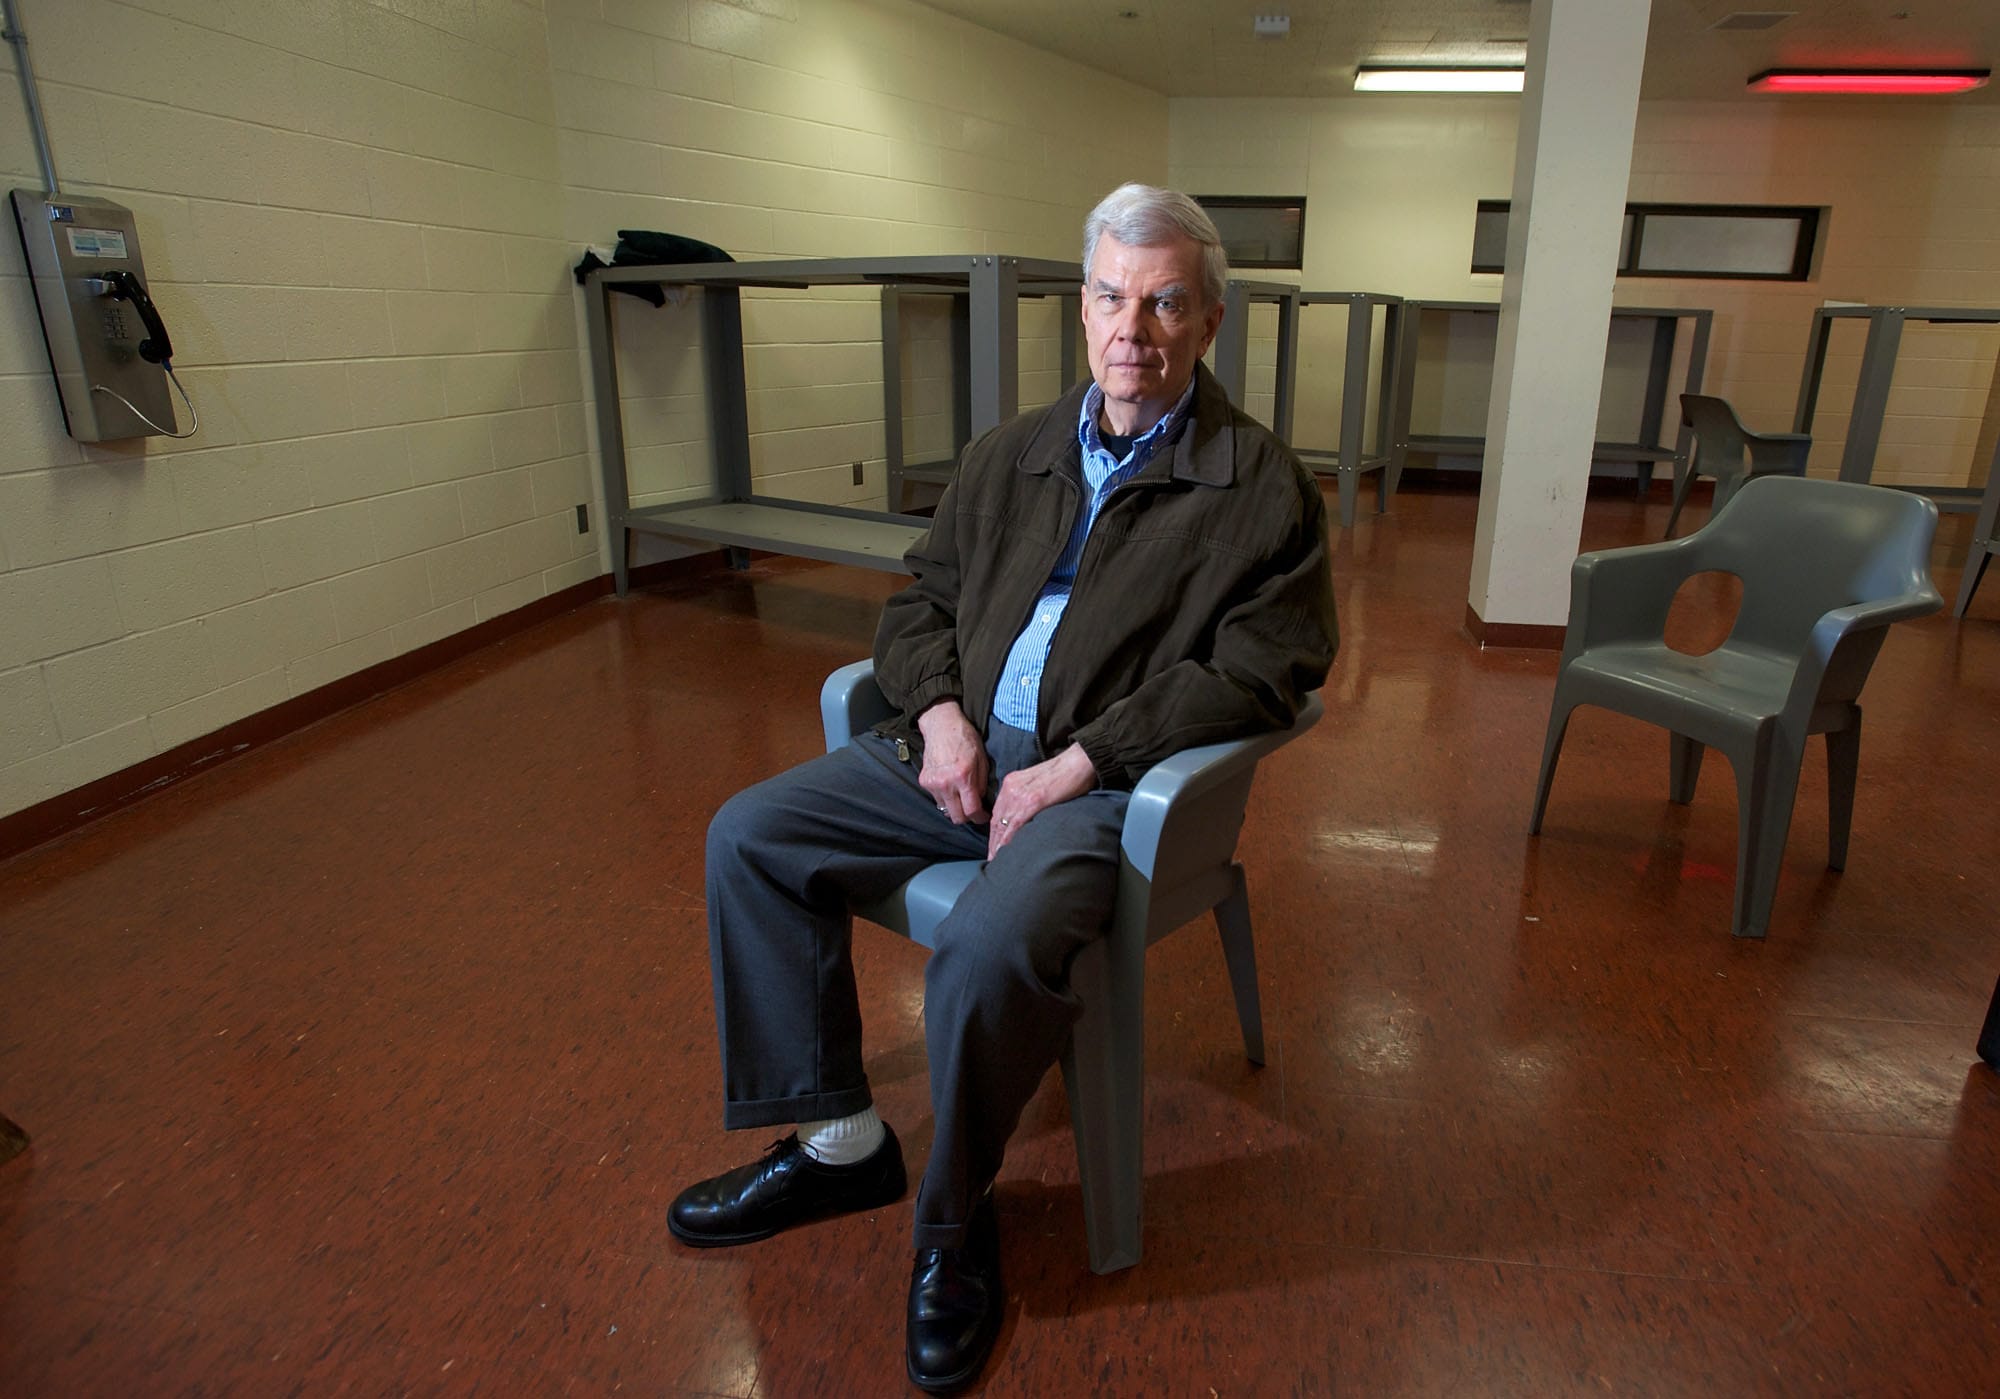 Mental health advocate Don Greenwood poses for a portrait at the Clark County Jail in December.